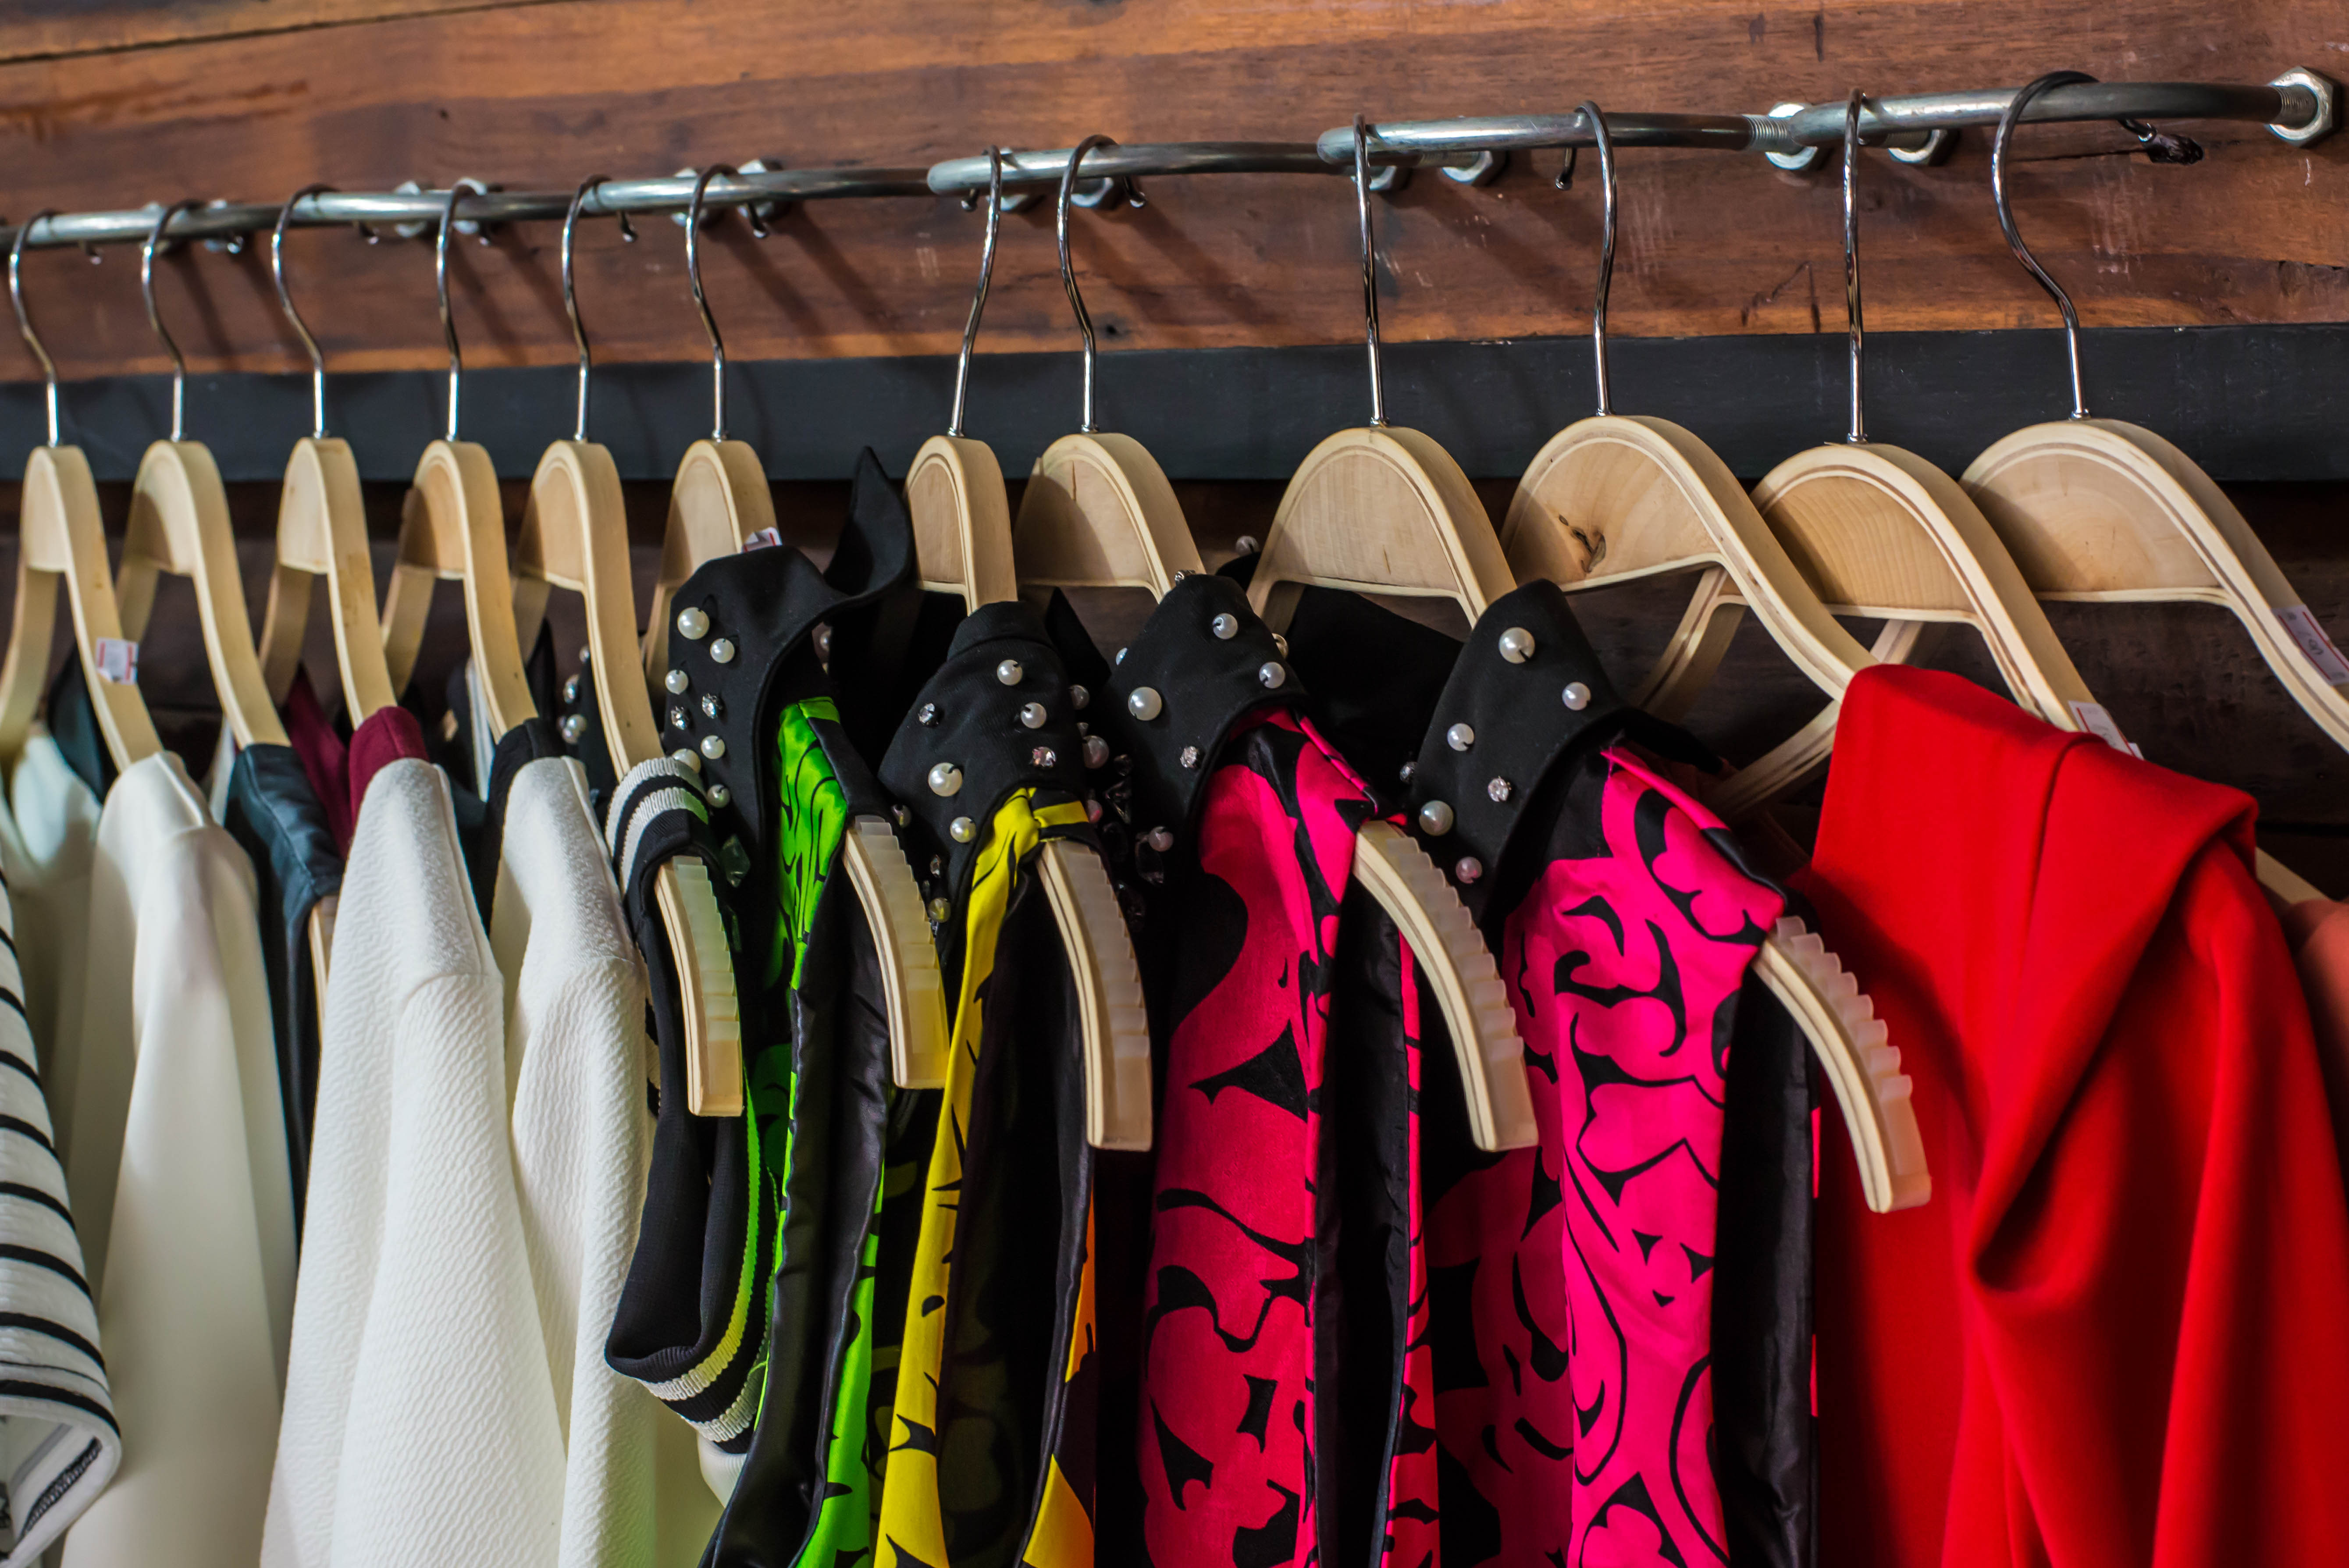 Tips to Install a Closet Organization System | The DIY Playbook